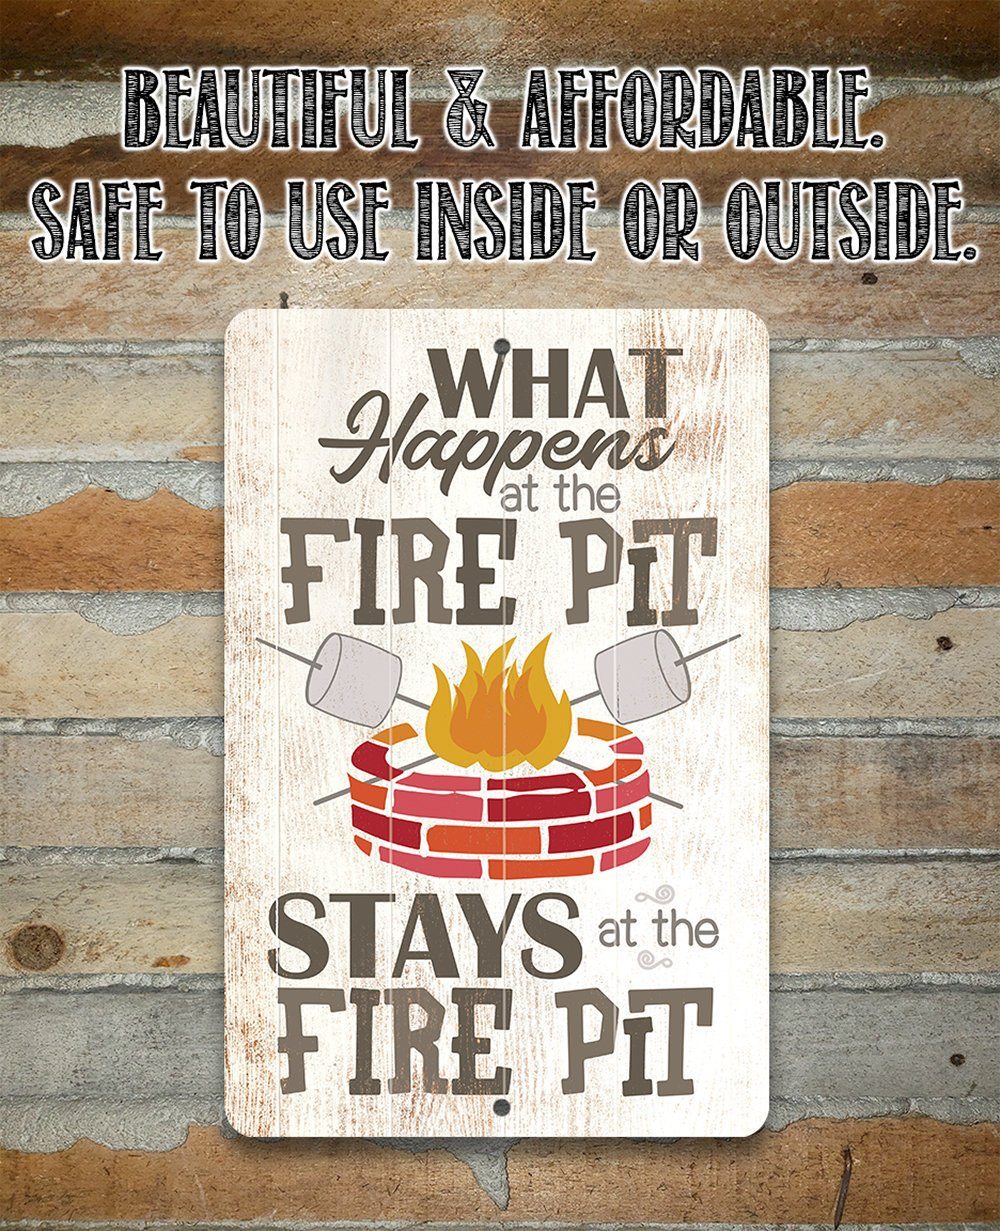 What Happens At The Firepit - Metal Sign | Lone Star Art.